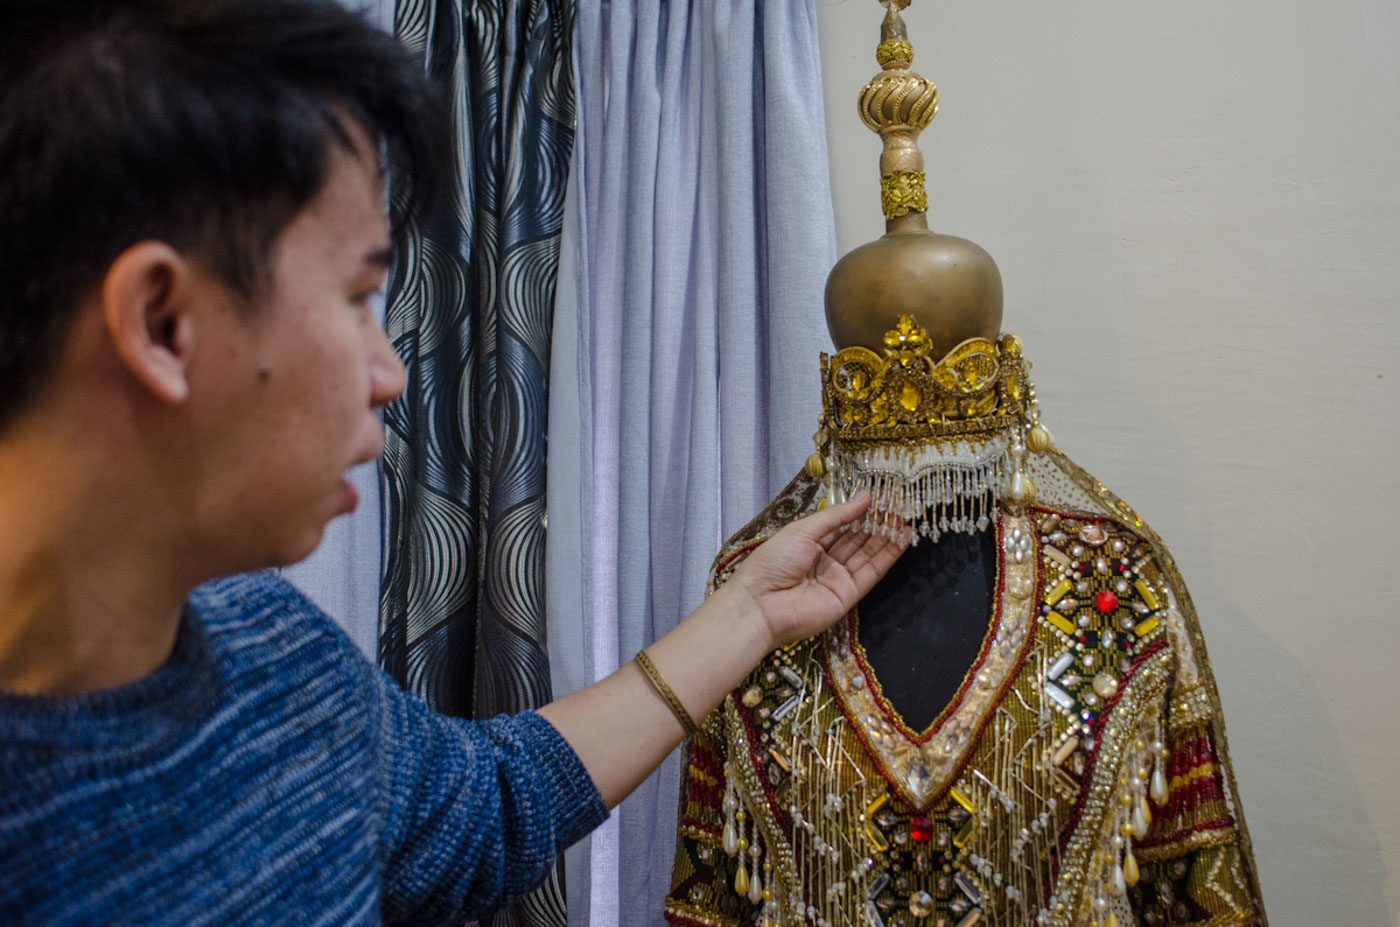 MARAWI TRIBUTE. Jearson shows the beads and embellishments in the national costume Catriona Gray wore for Bb Pilipinas.  